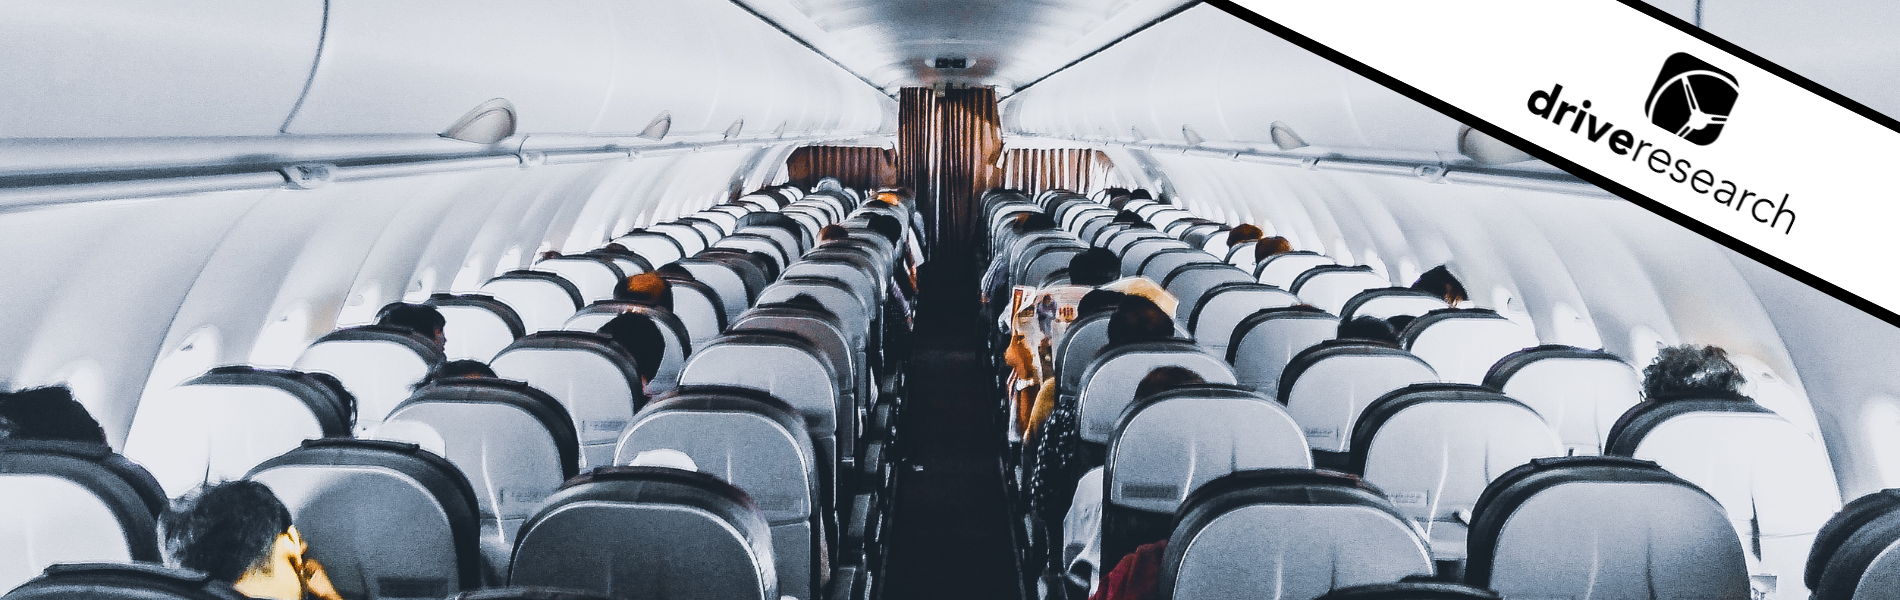 people inside commercial airplane